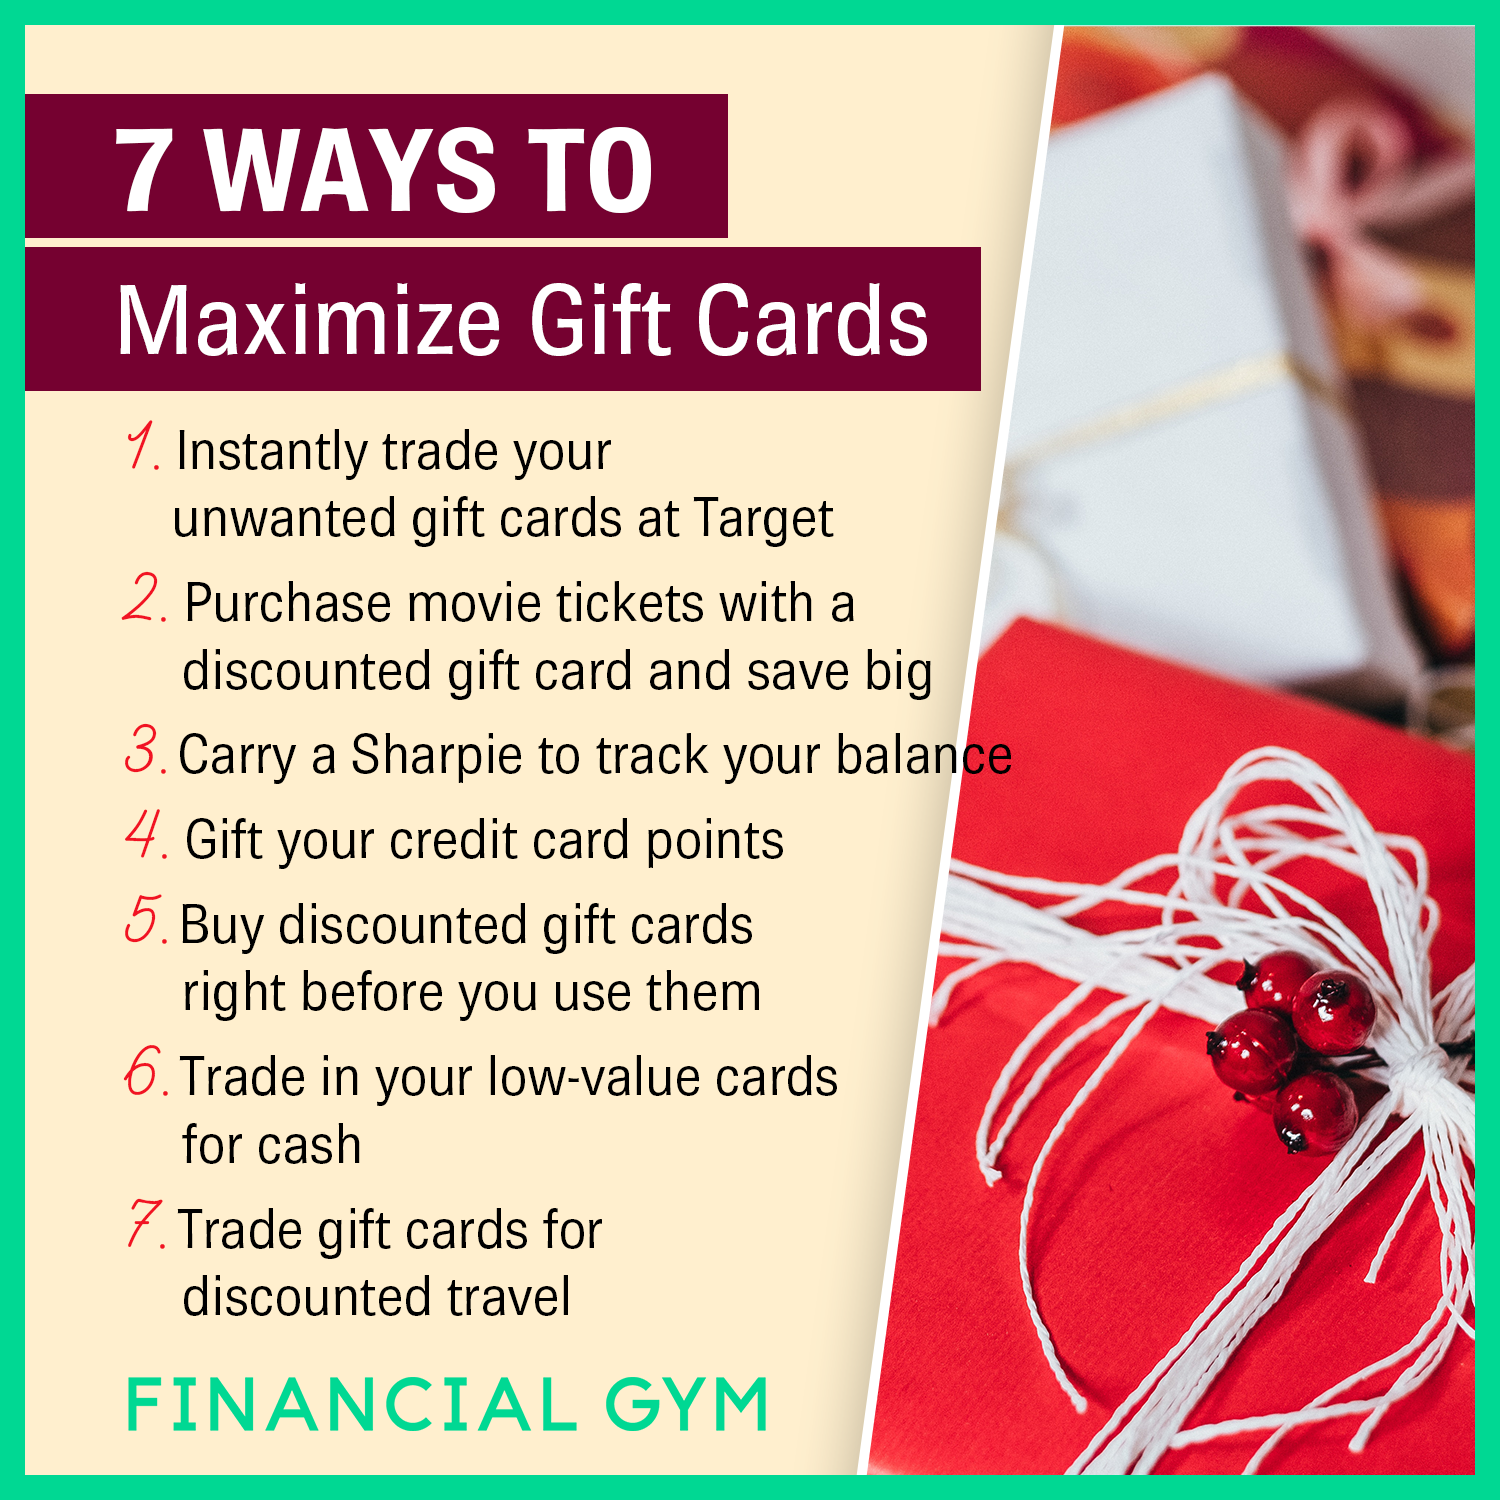 How to Earn Points Buying Gift Cards 